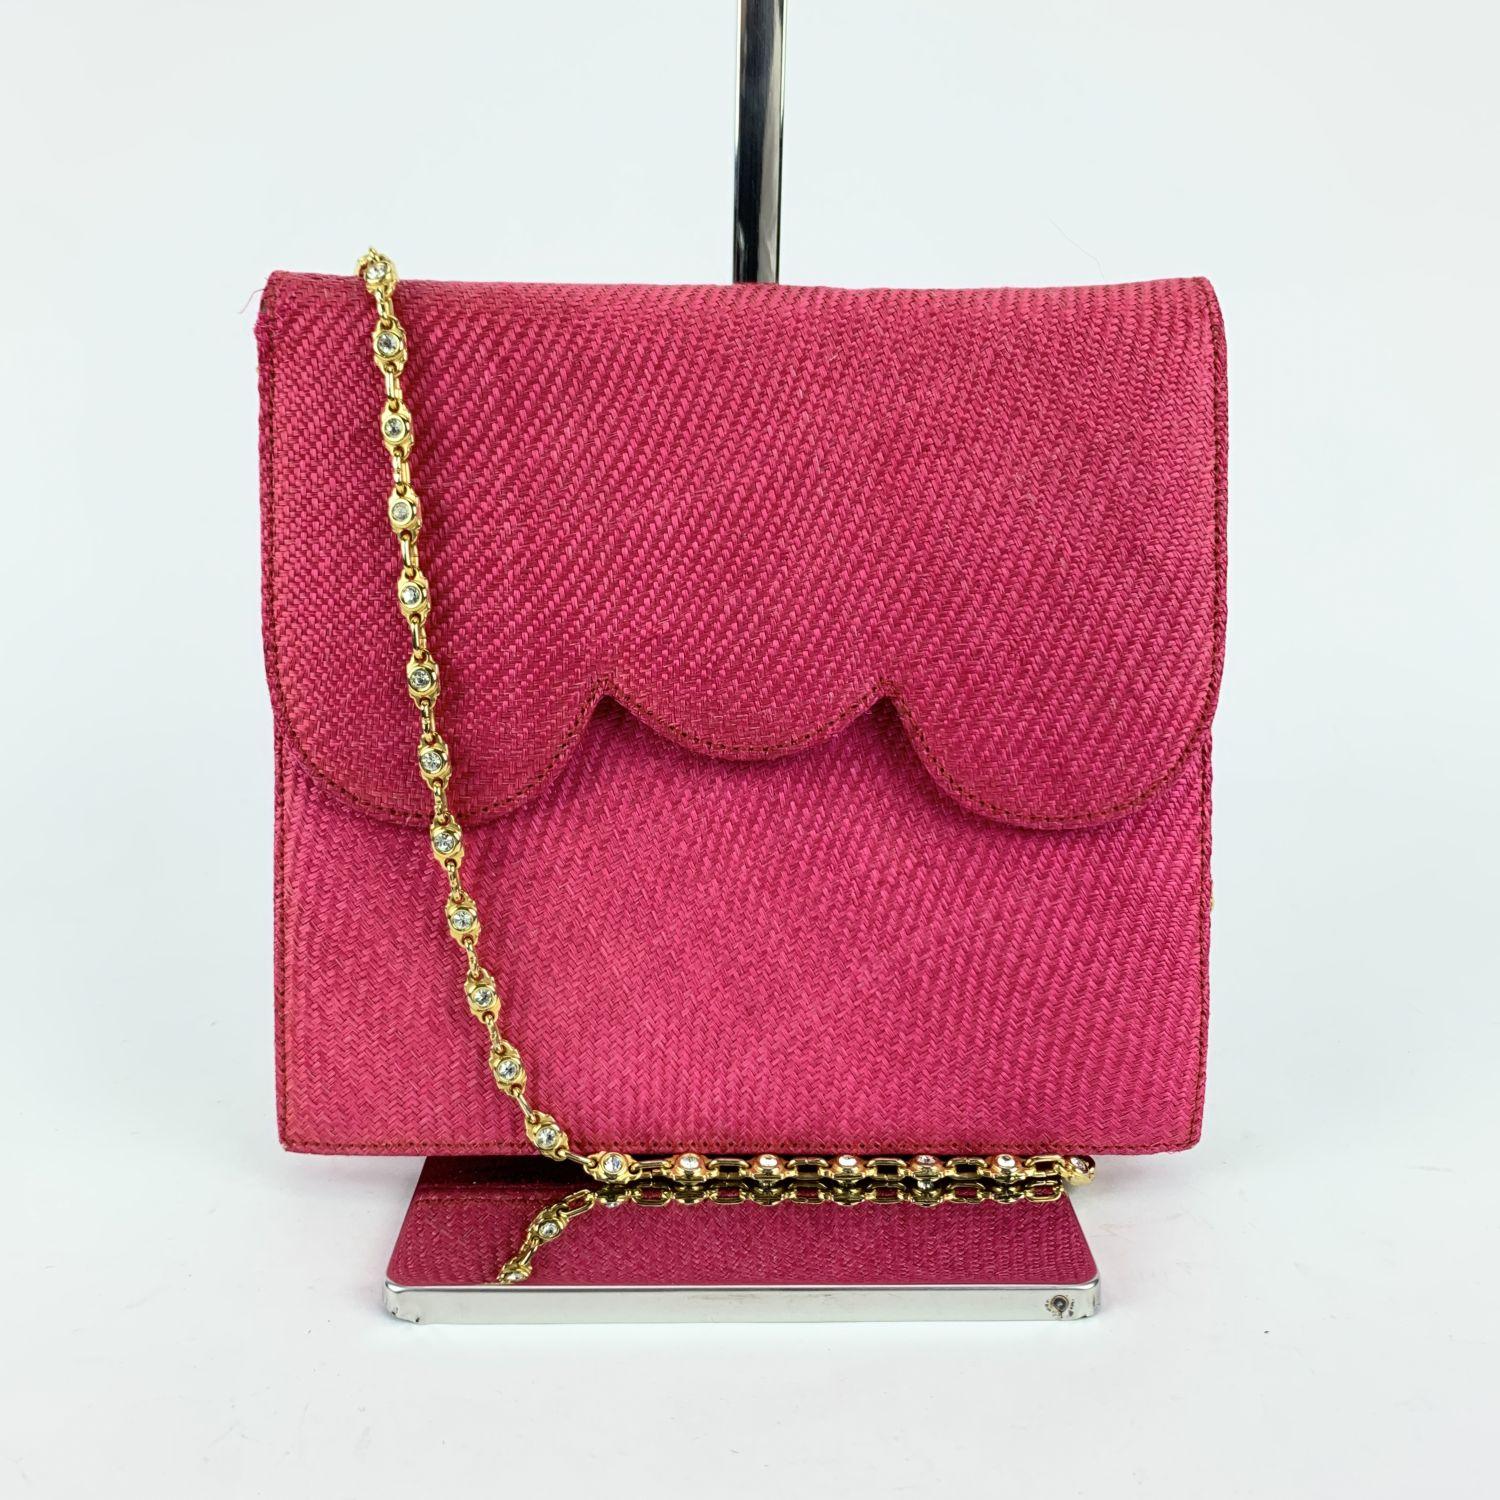 Evening bag signed NIGHT by VALENTINO GARAVANI. Woven raffia in hot pink color. Flap with magnetic button closure. Red leather on the reverse of the flap with embossed V- Valentino logo. Gros-grain fabric lining and 1 side zip pocket inside. Gold